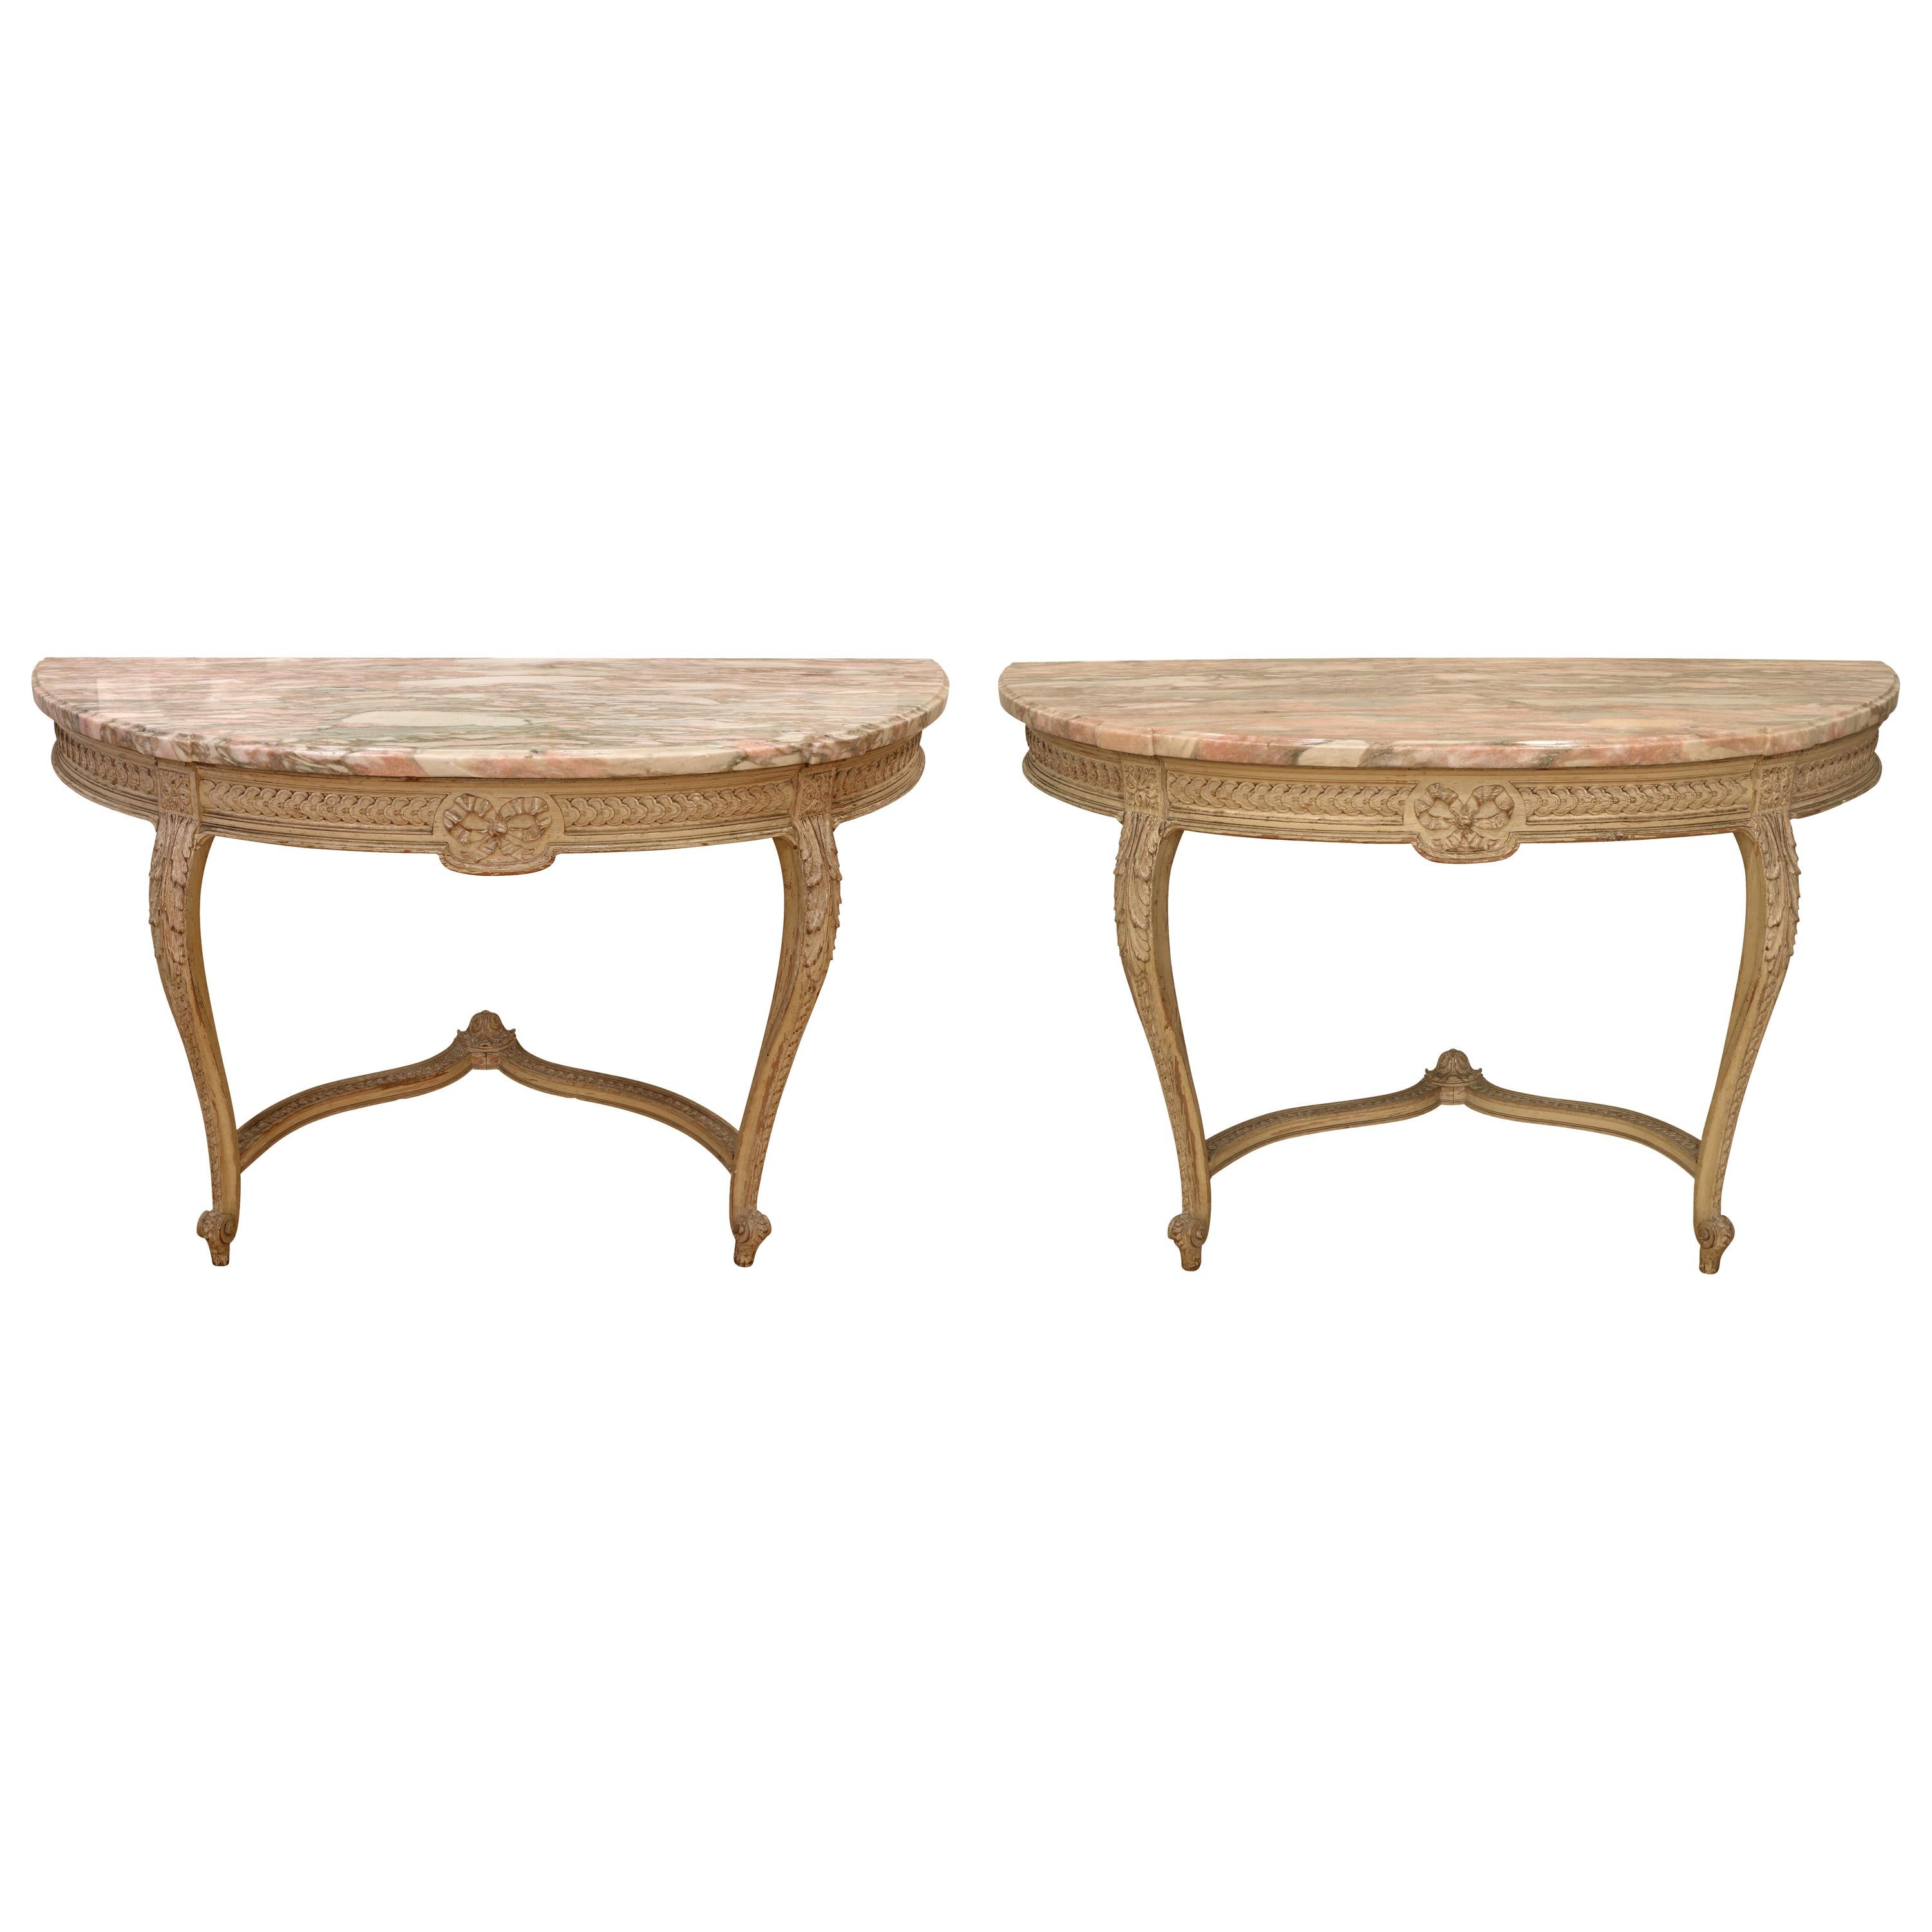 Pair of Louis XVI Style Marble-Top Demilune Consoles